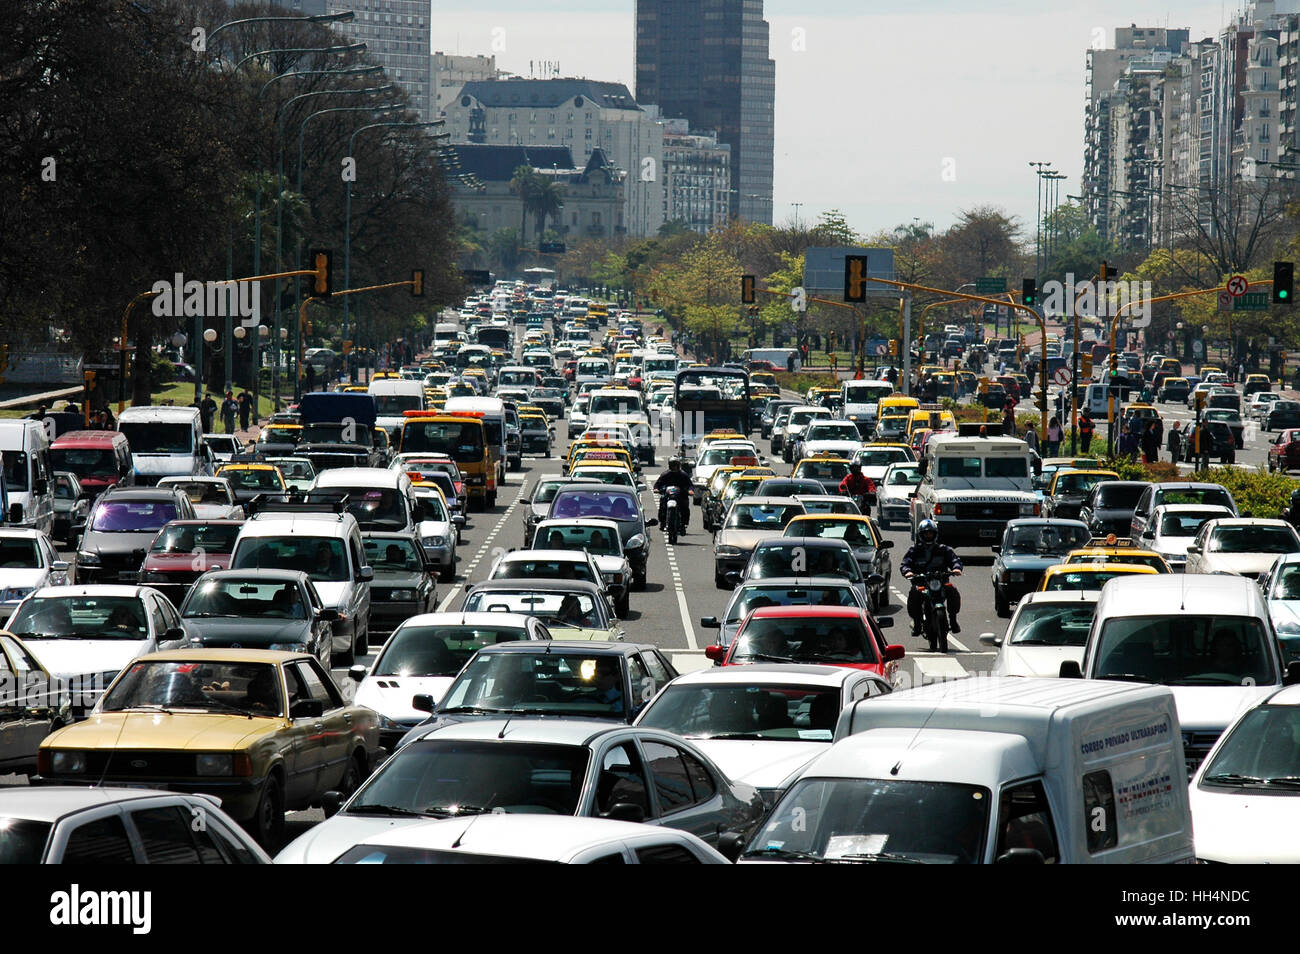 Heavy traffic during the rush hour on the widest avenue of the world, Avenida 9 de Julio, Buenos Aires, Argentina. Stock Photo